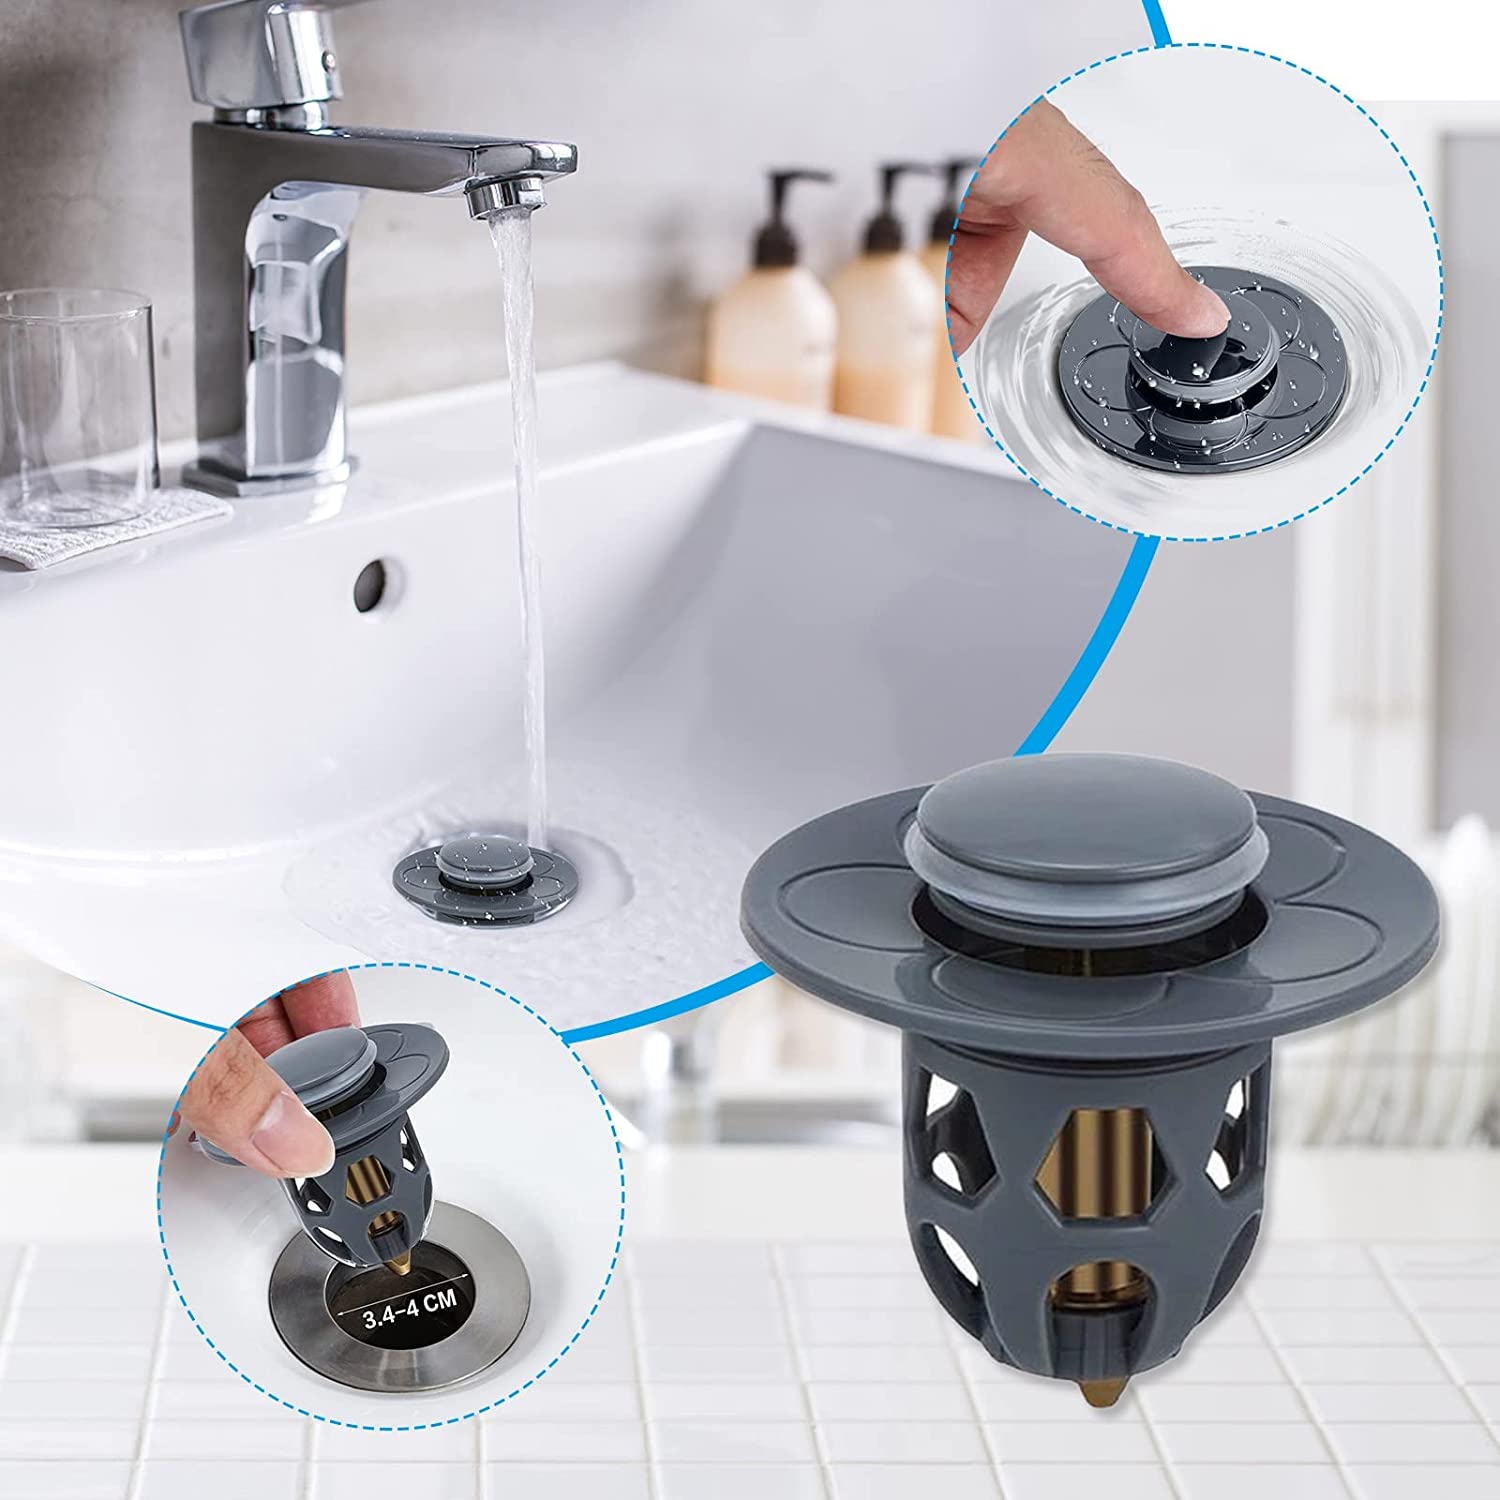 BROWSLUV™ 2-in-1 Universal Drain Stopper